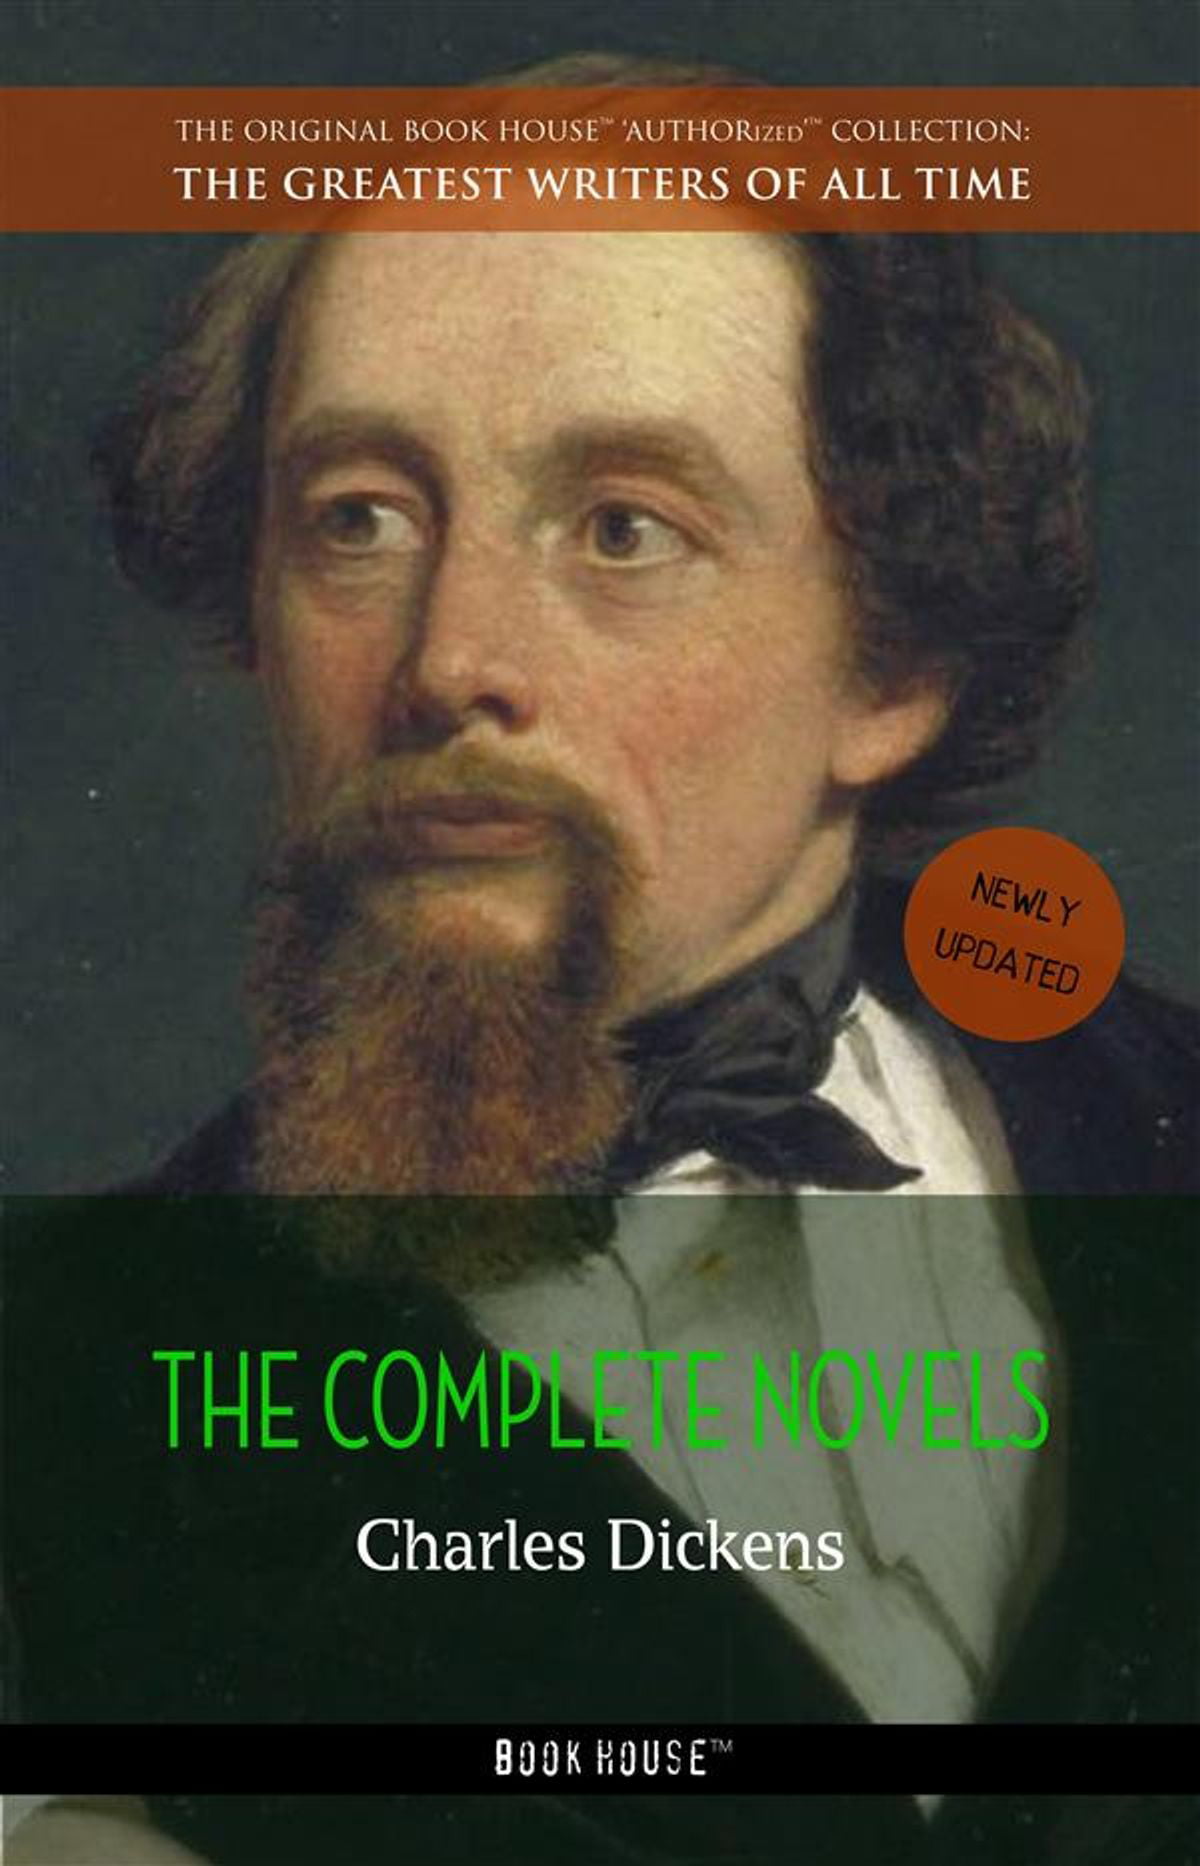 Charles dickens biography book